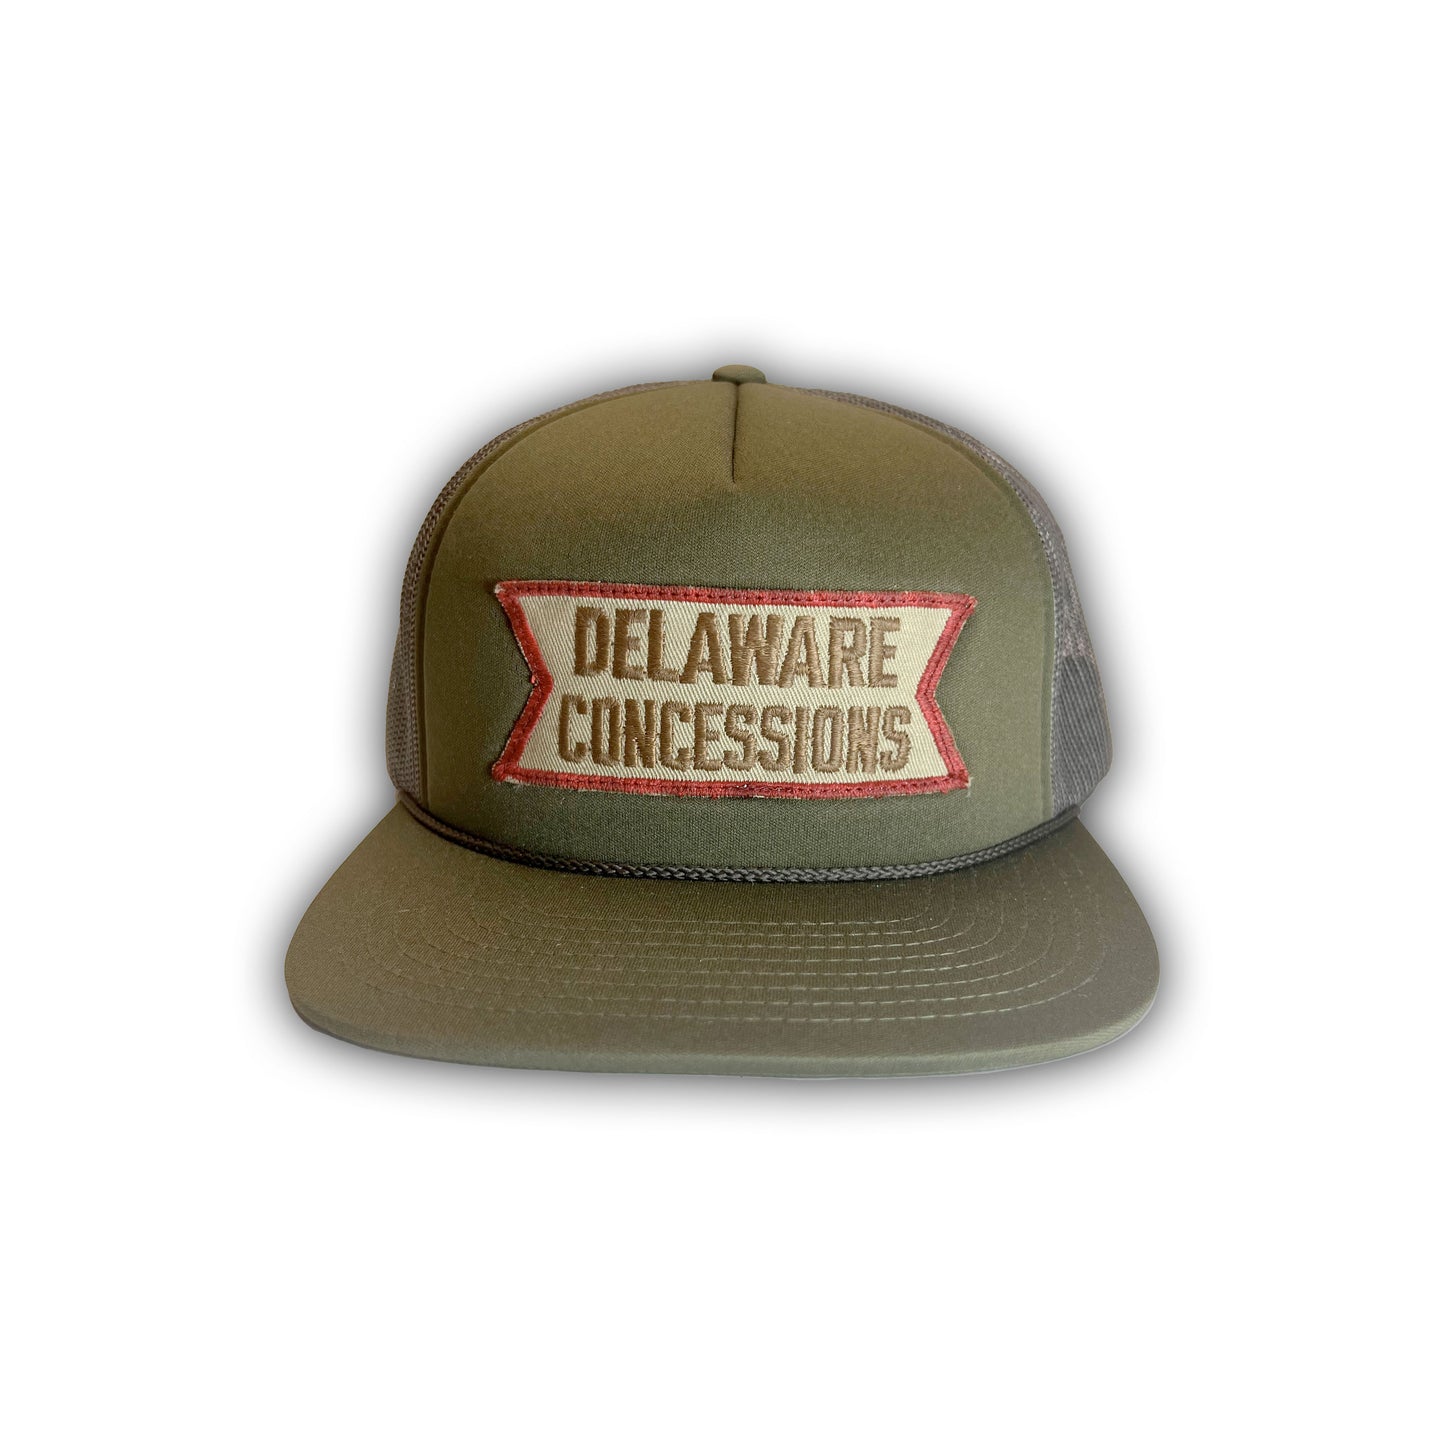 Delaware Concessions. Hat. Green/Brown.